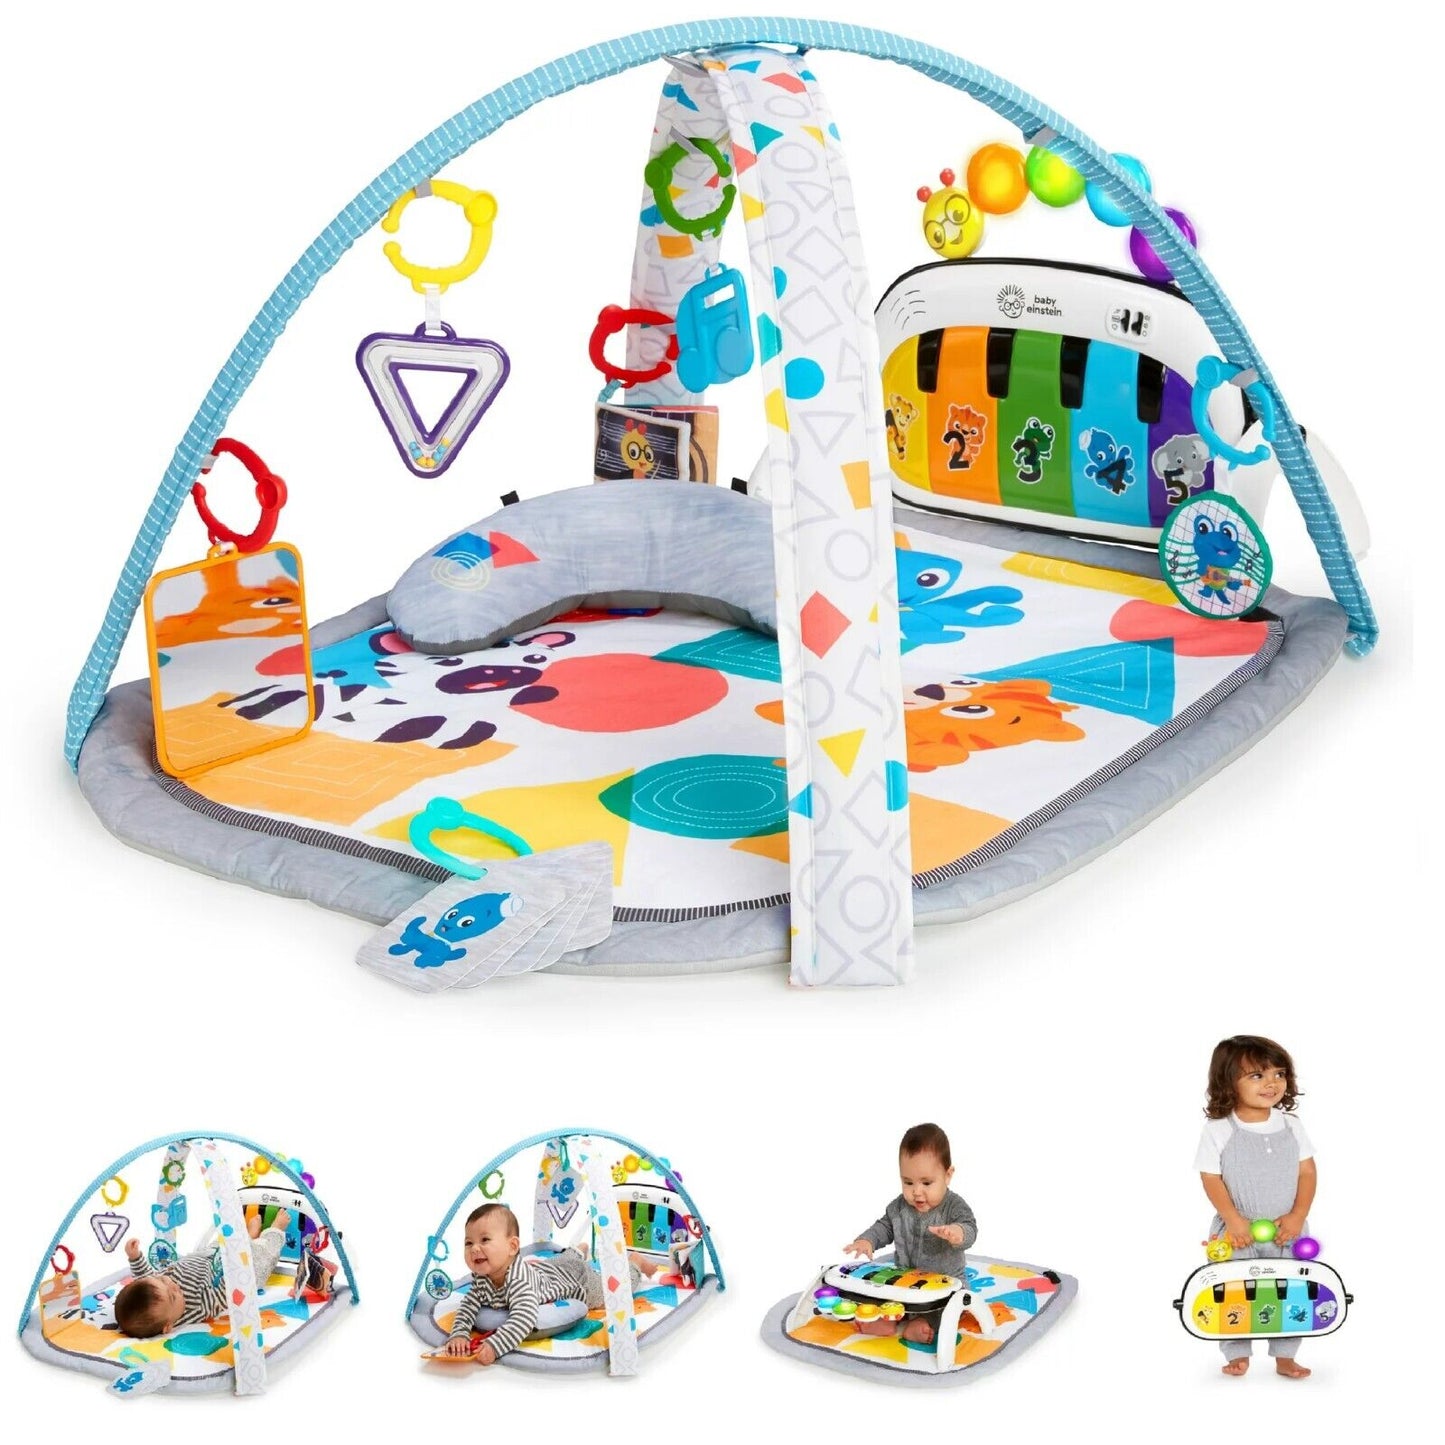 Baby Einstein 4-in-1 Kickin' Tunes Music and Language Discovery Play Gym